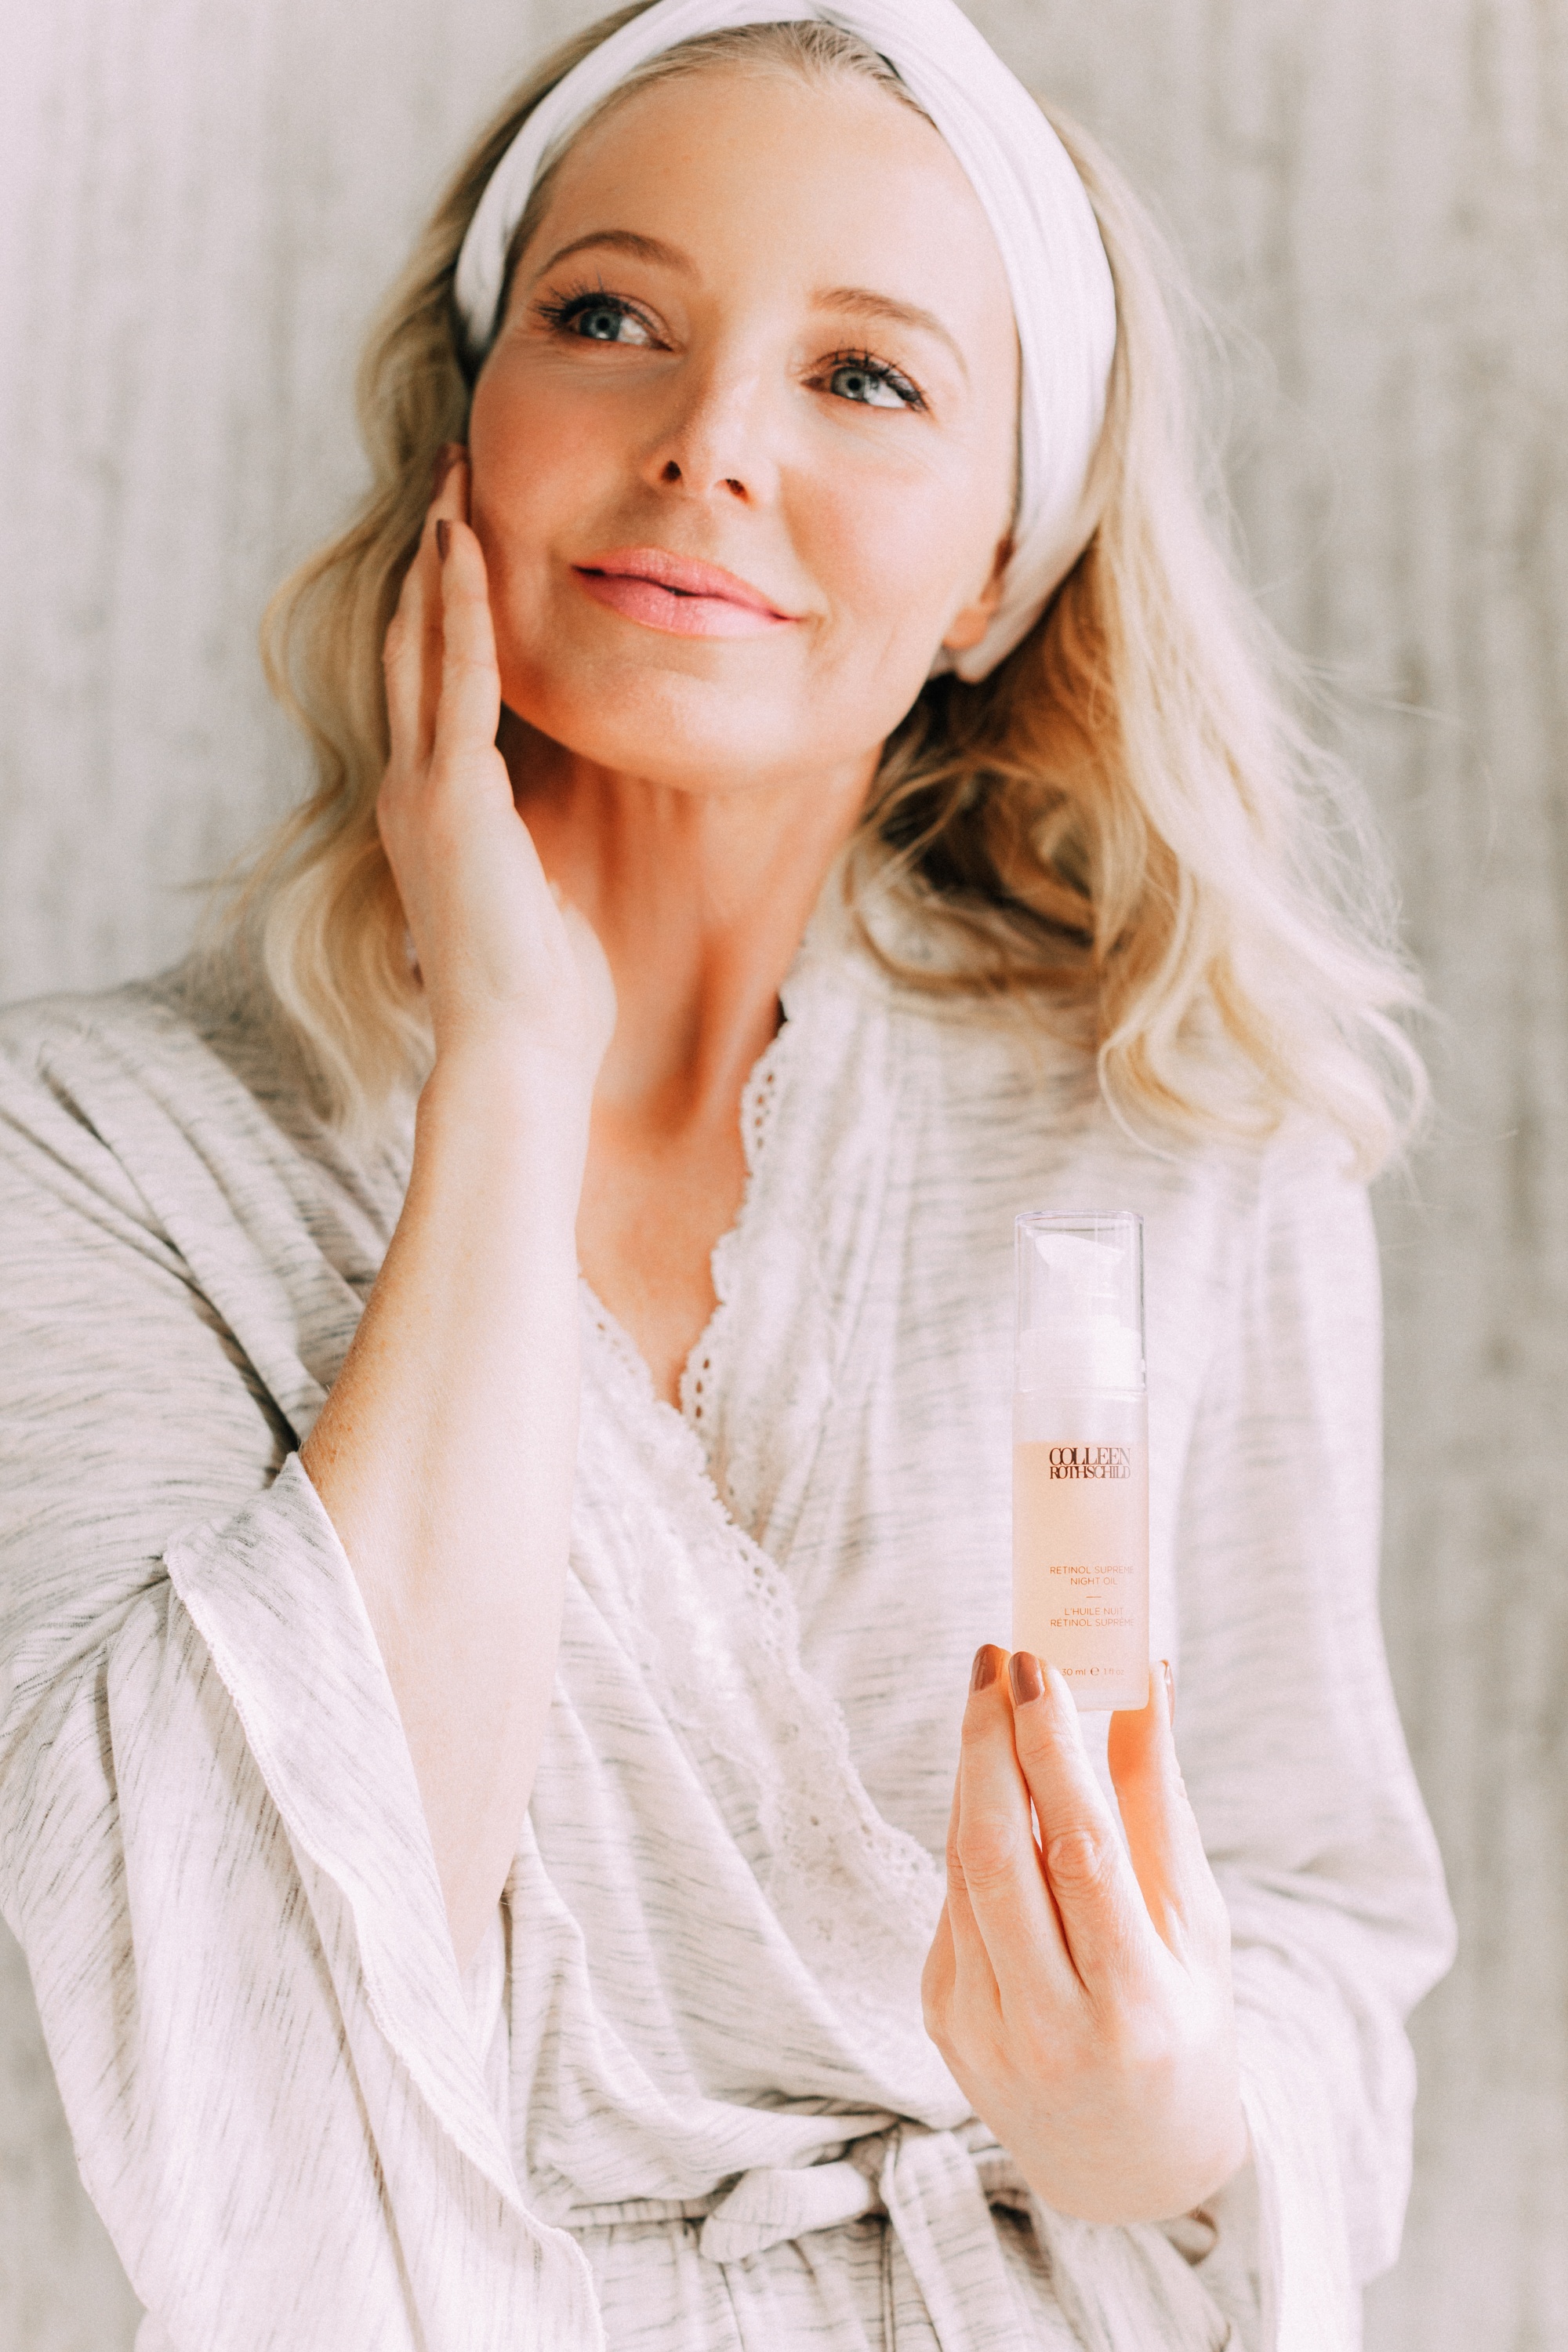 Anti-Aging Treatments, Fashion blogger Erin Busbee of BusbeeStyle.com sharing her secrets to anti-aging including products from Colleen Rothschild like the Retinol Supreme Night Oil